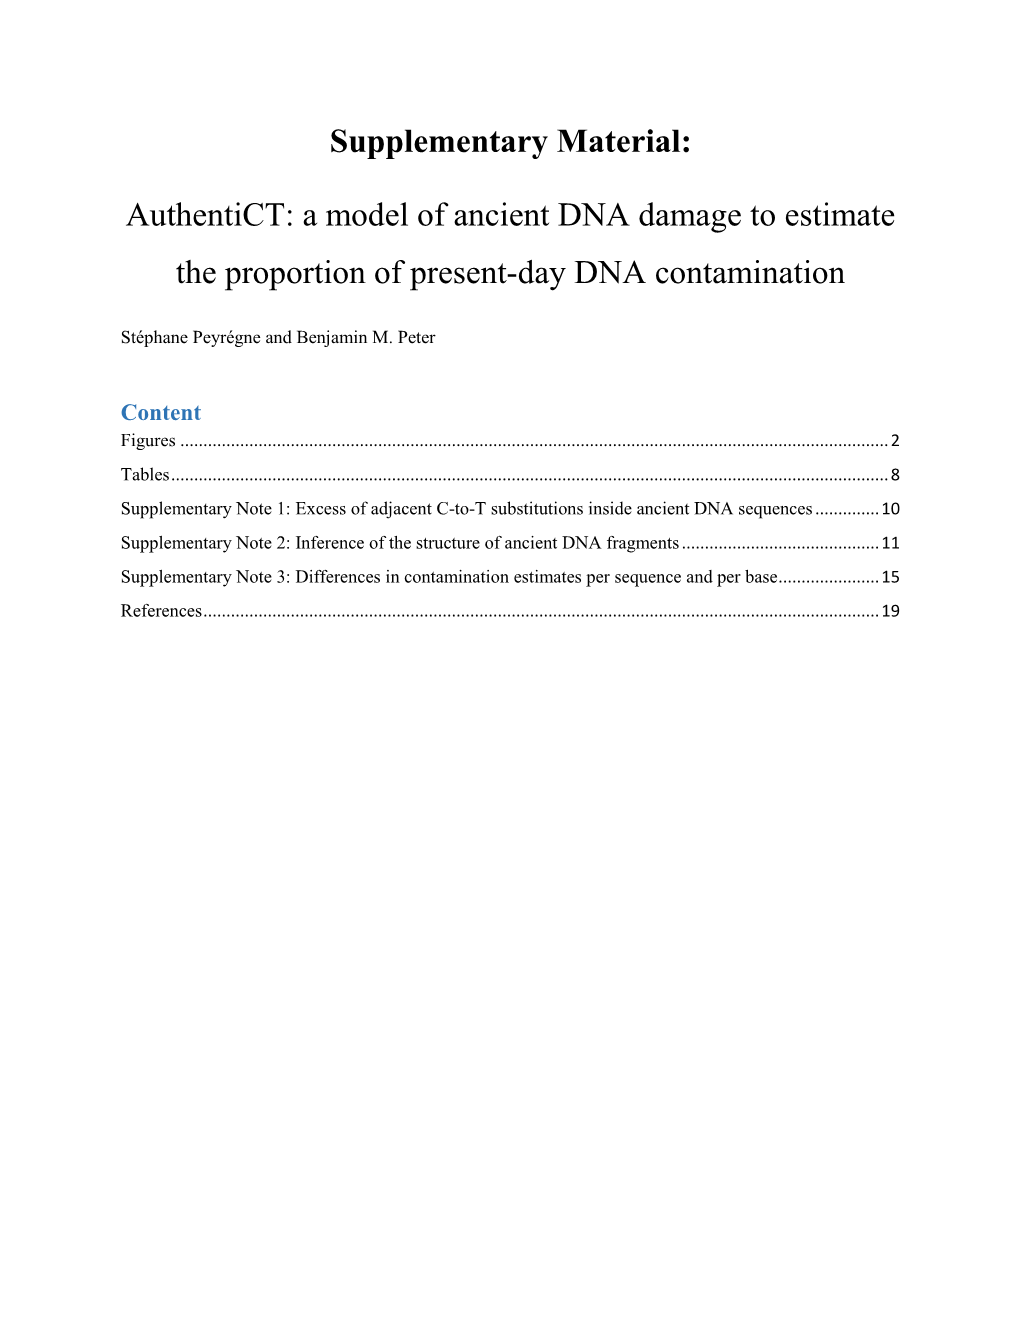 Supplementary Material: Authentict: a Model of Ancient DNA Damage to Estimate the Proportion of Present-Day DNA Contamination